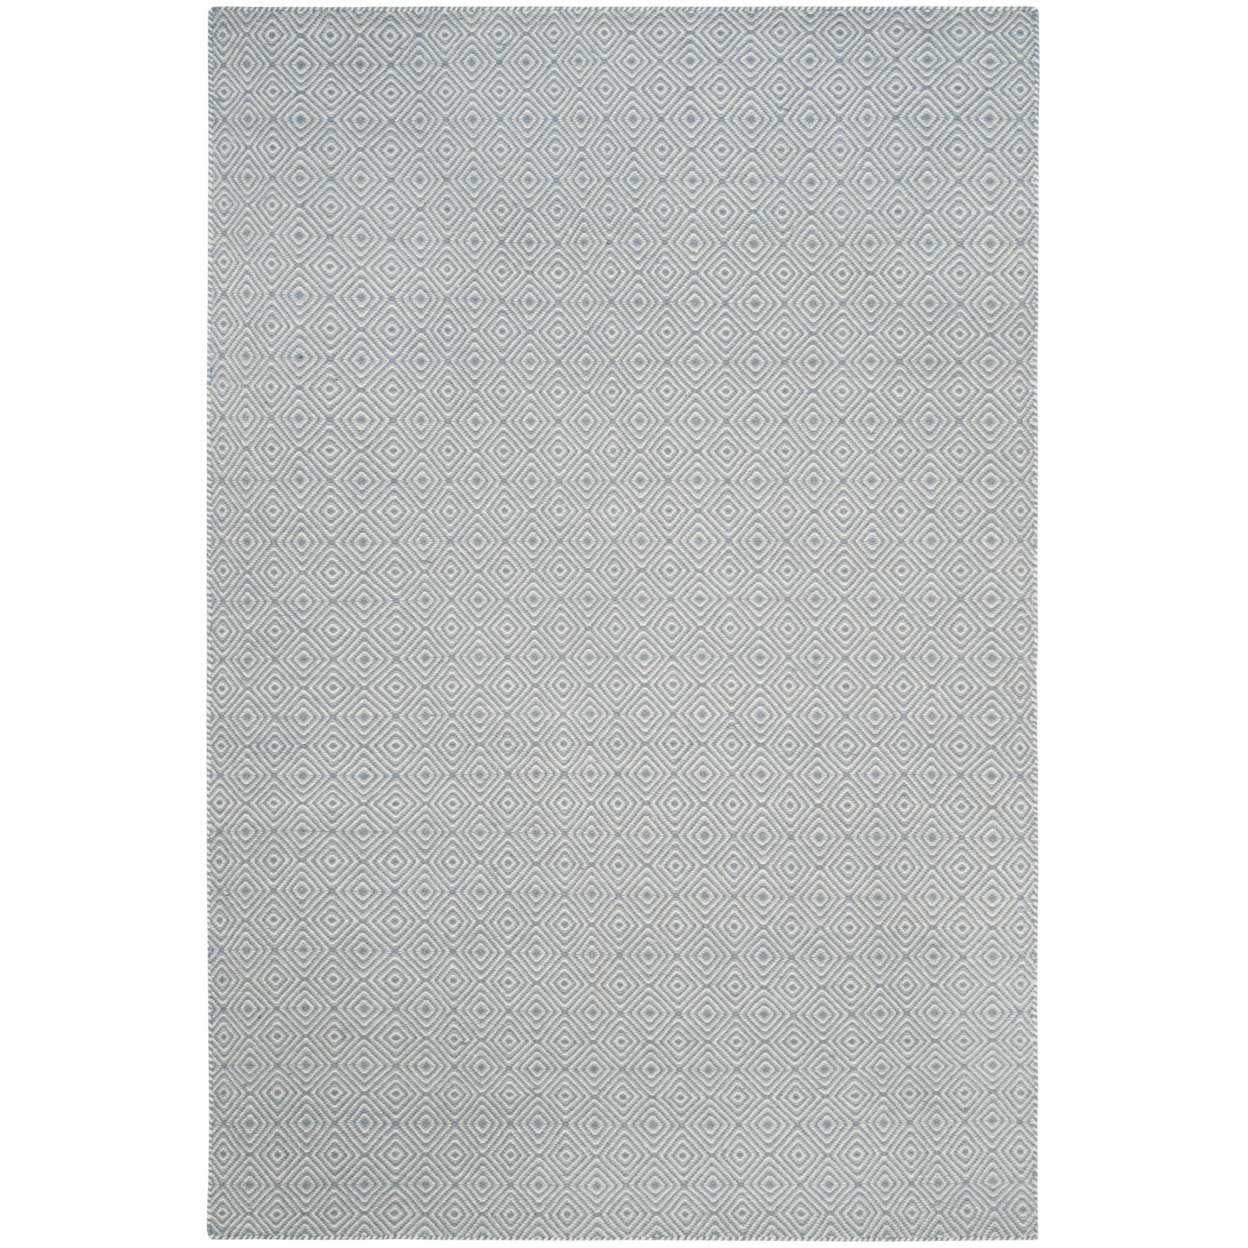 SAFAVIEH Oasis OAS525A Handwoven Silver / Ivory Rug - 6' X 9'